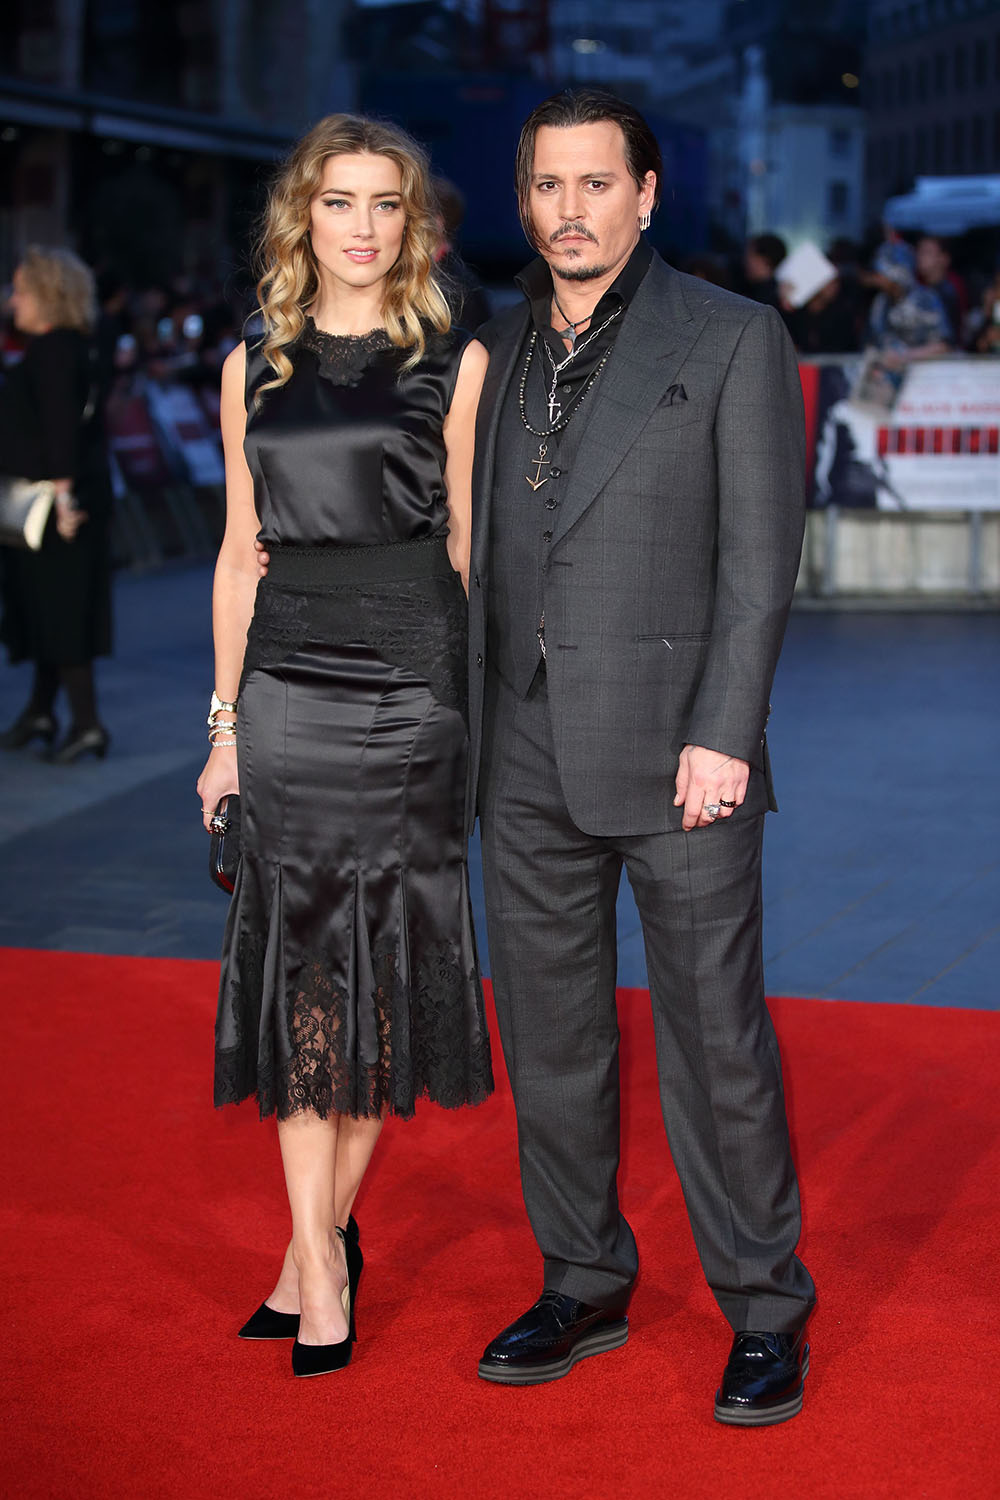 The couple ooze style in matching all black outfits at the London premiere of Johny's film Black Mass in October, 2015.